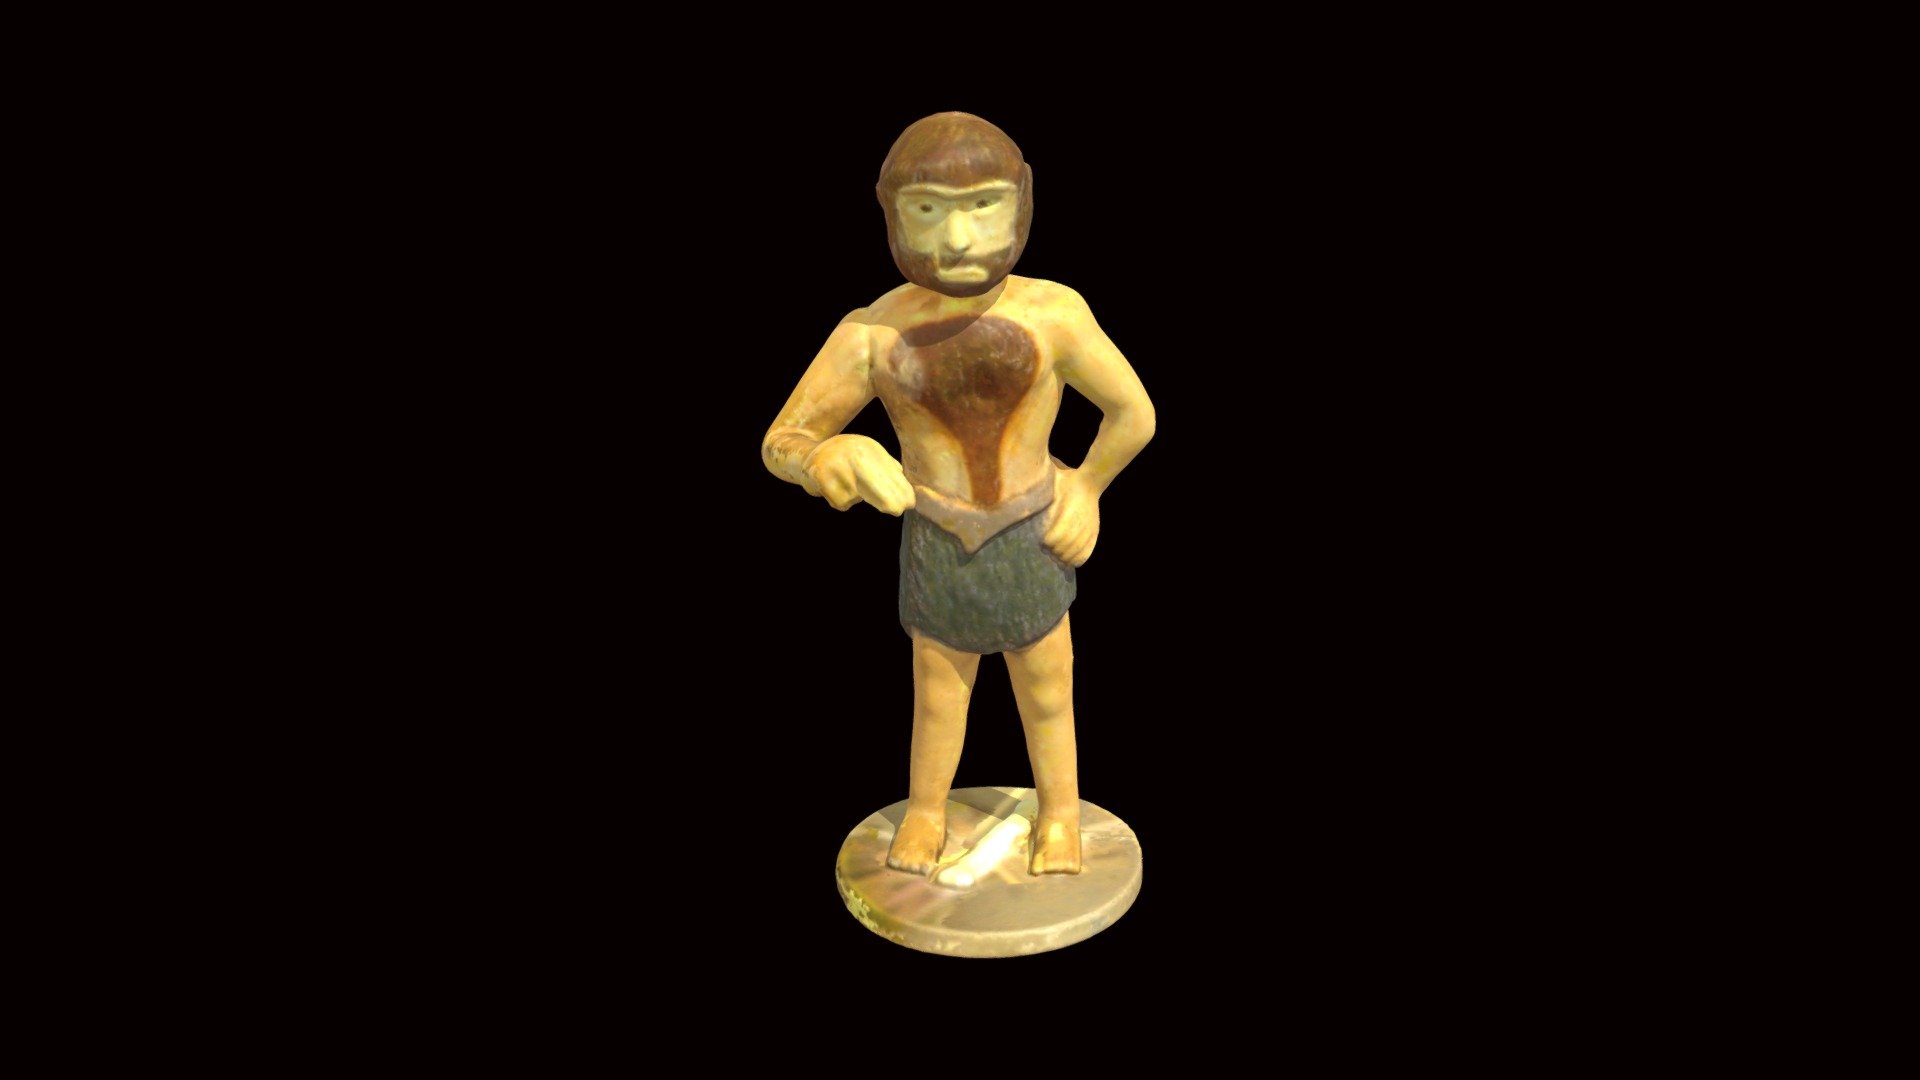 This rubber figurine was purchased as part of a “caveman” set. It was 3D scanned with a NextEngine Desktop 3D scanner 3d model